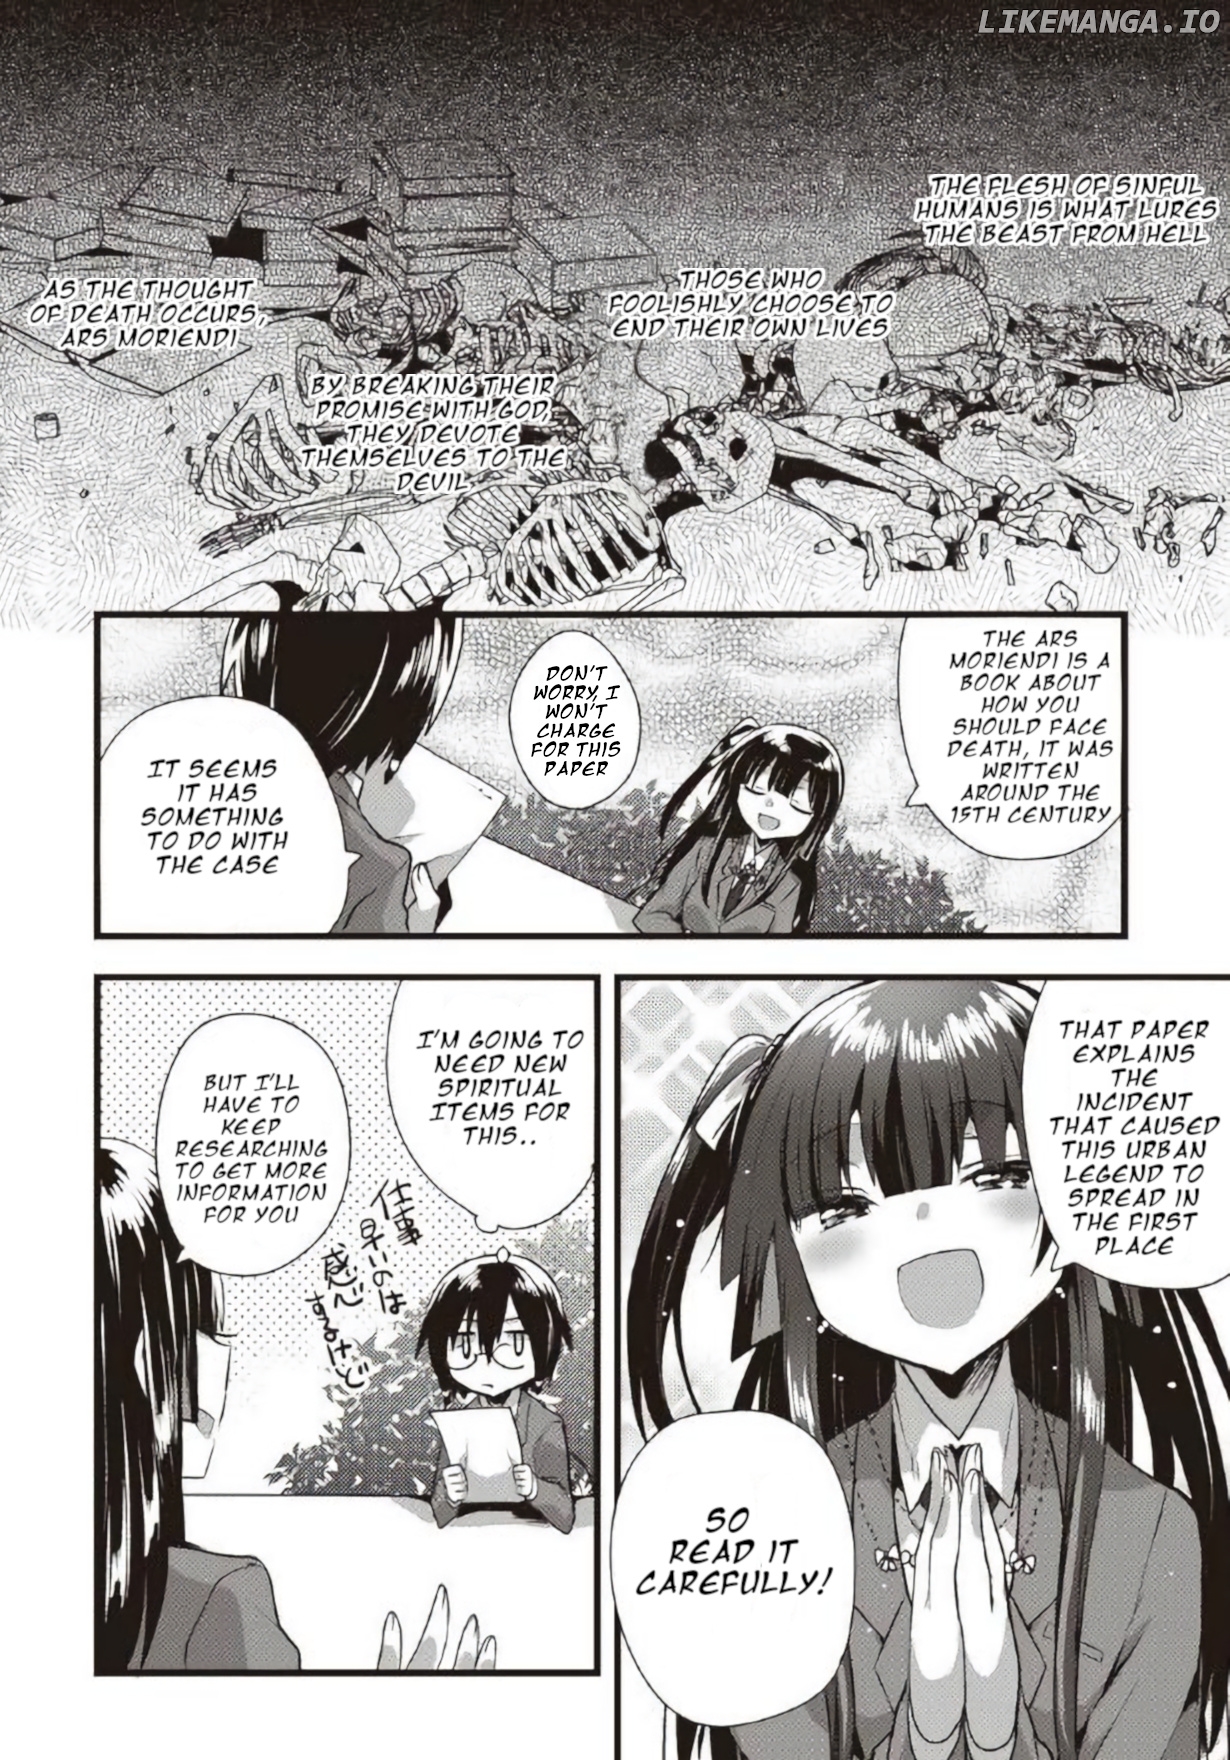 Corpse Party Cemetery 0 - Kaibyaku no Ars Moriendi chapter 11 - page 16